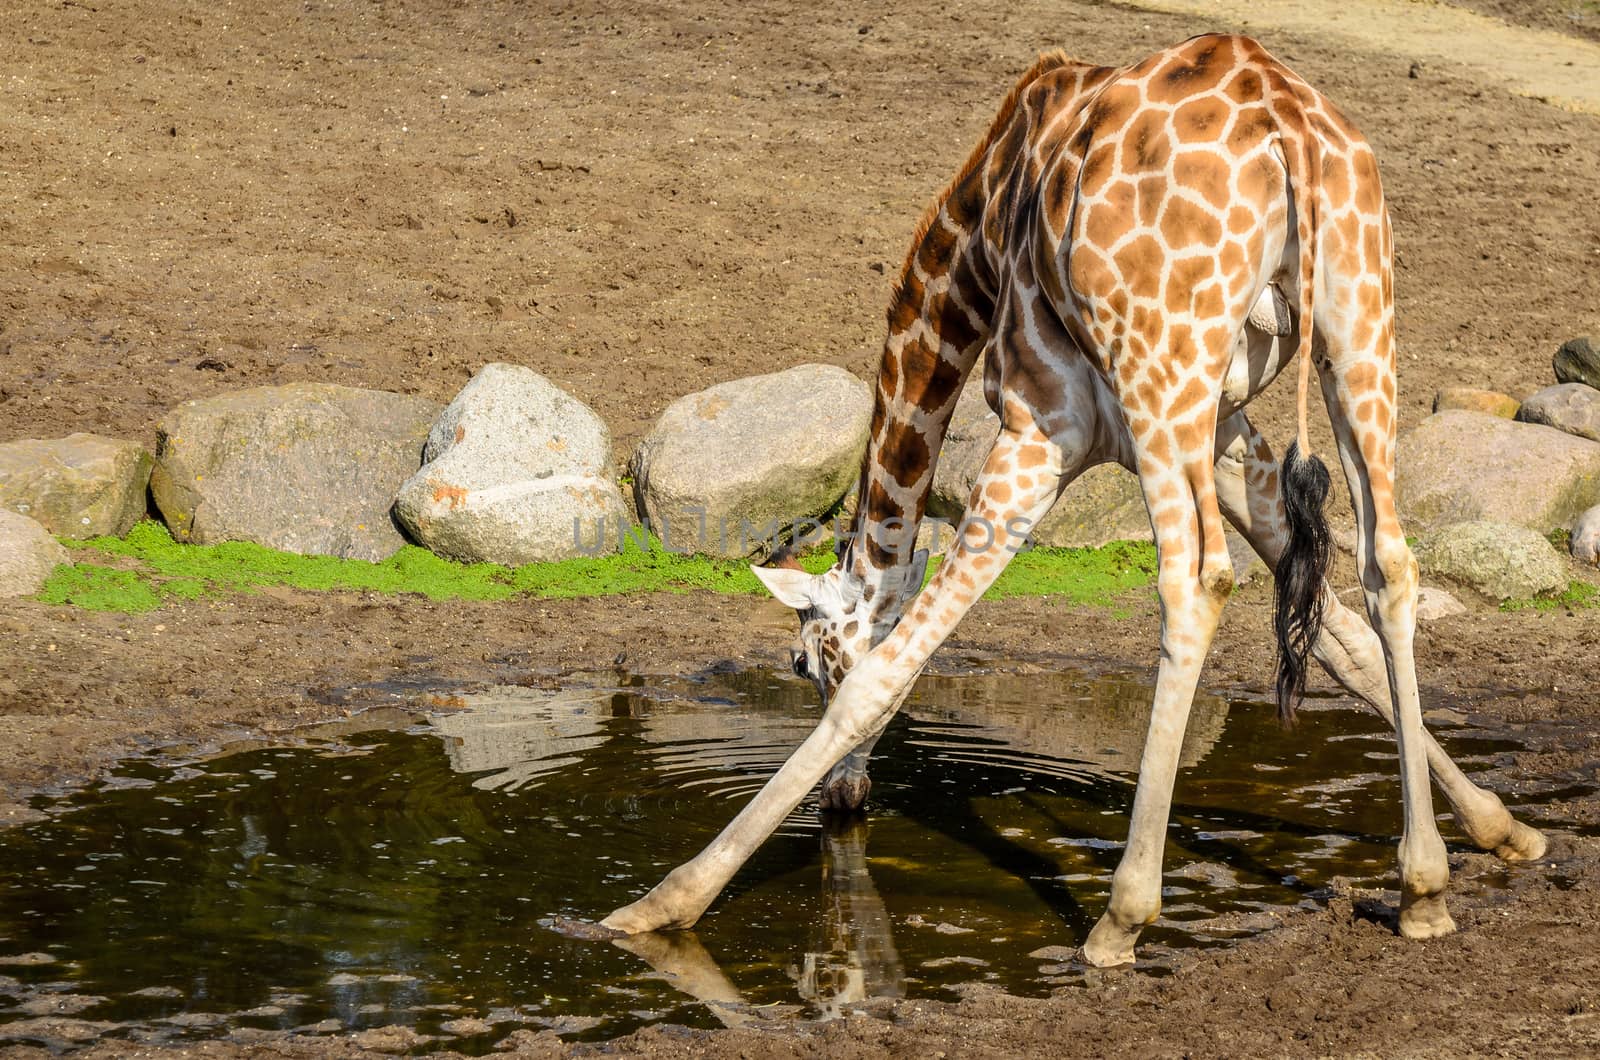 This giraffe was obviously very thirsty. I love the way they get int the most impossible angles to get to water down low.